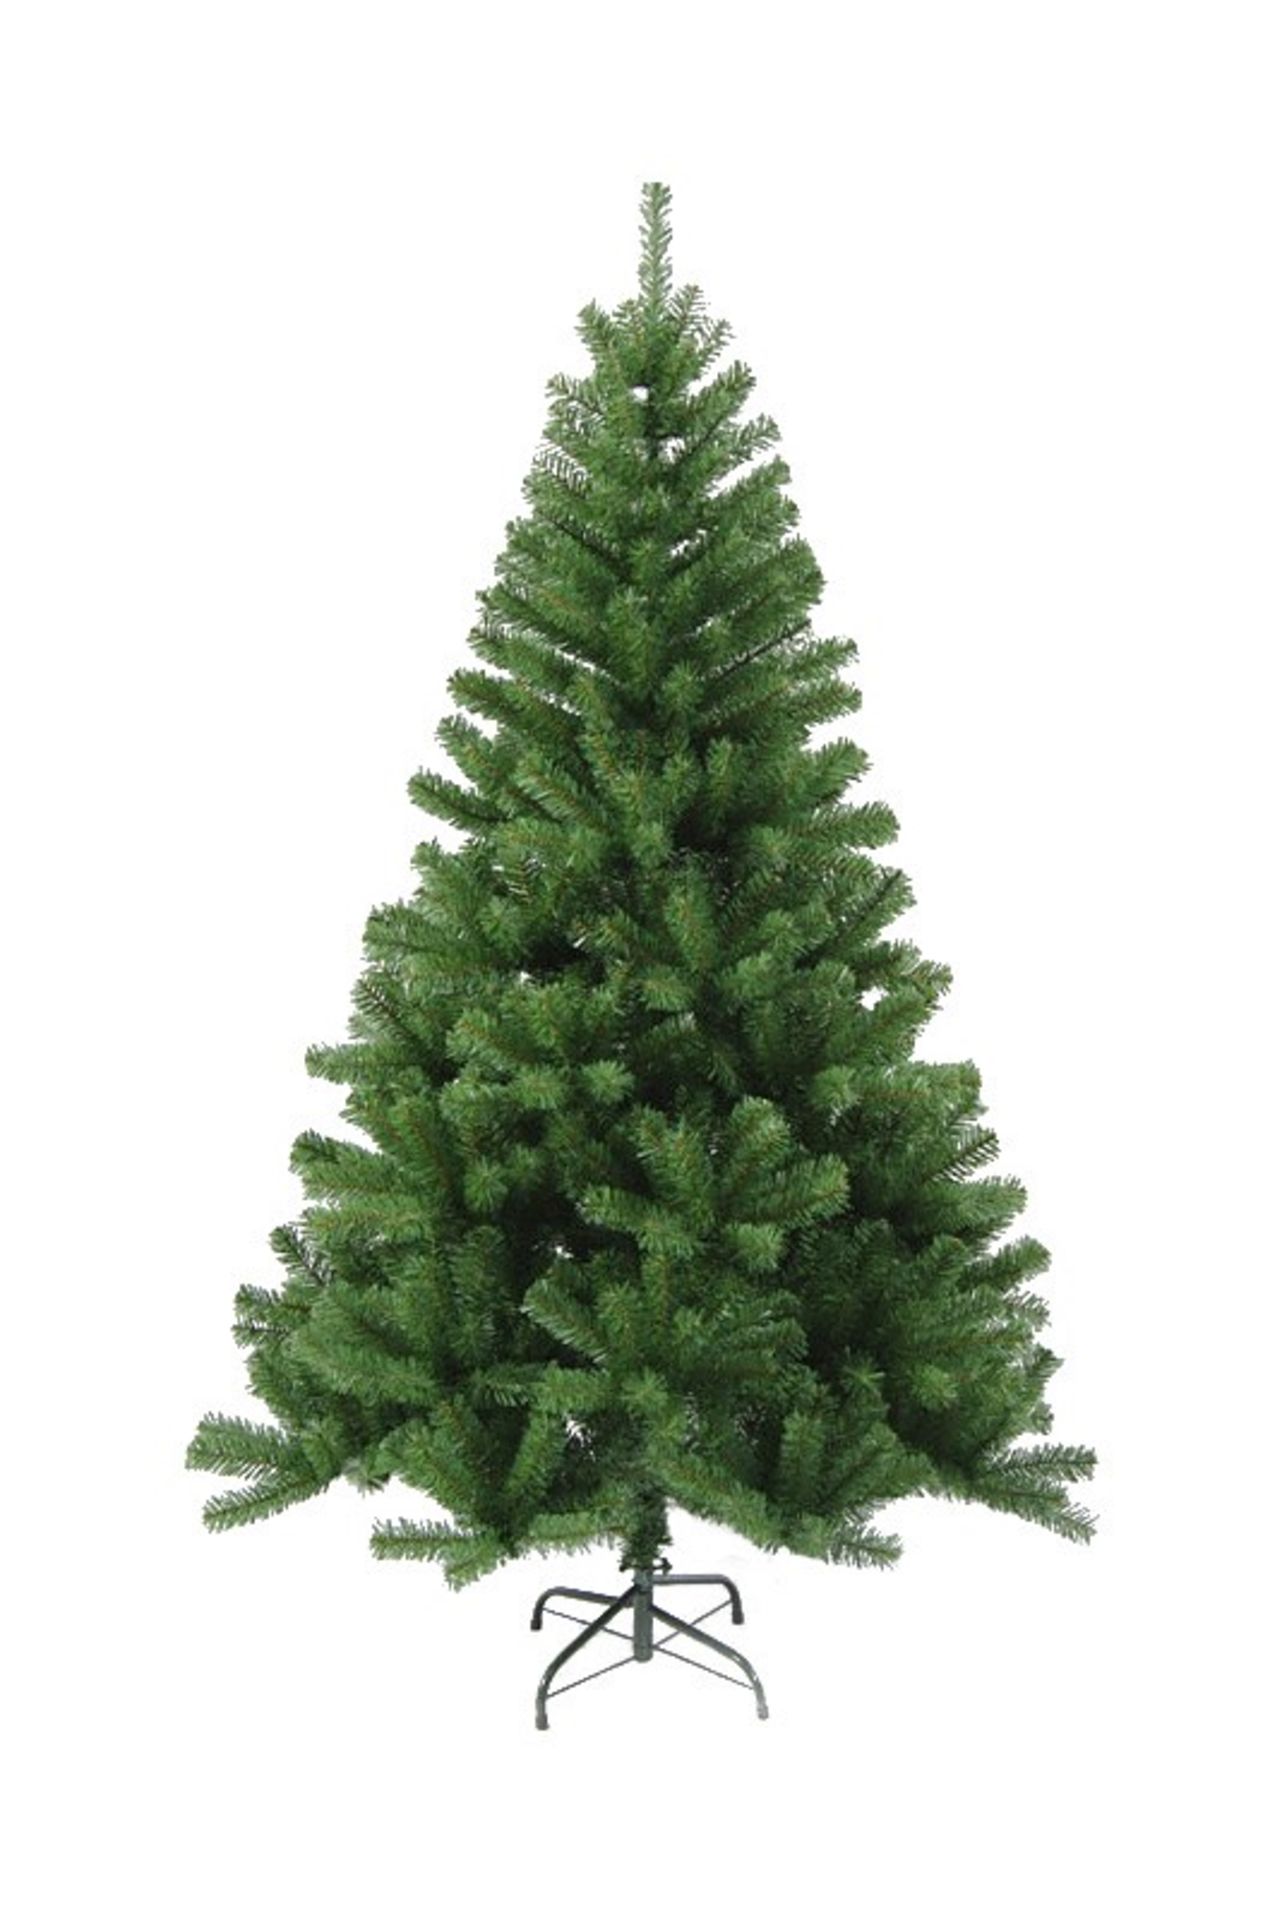 + VAT Brand New "Noel" Luxury 7ft Classic Spruce Christmas Tree- Complete With Metal Base/Stand -